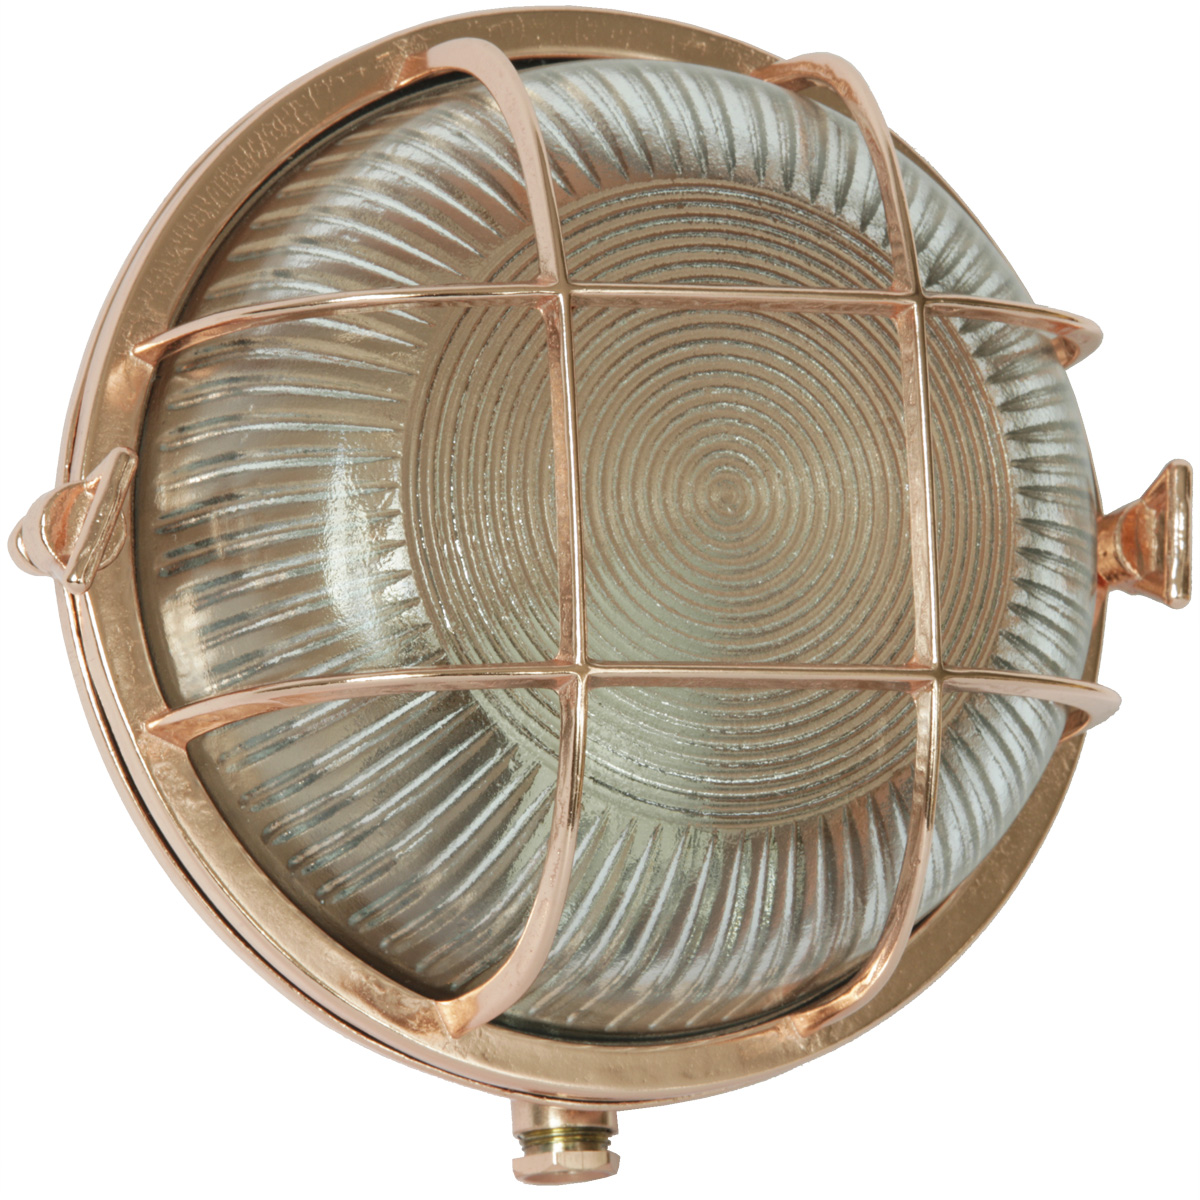 Round cabin light with grid made of copper